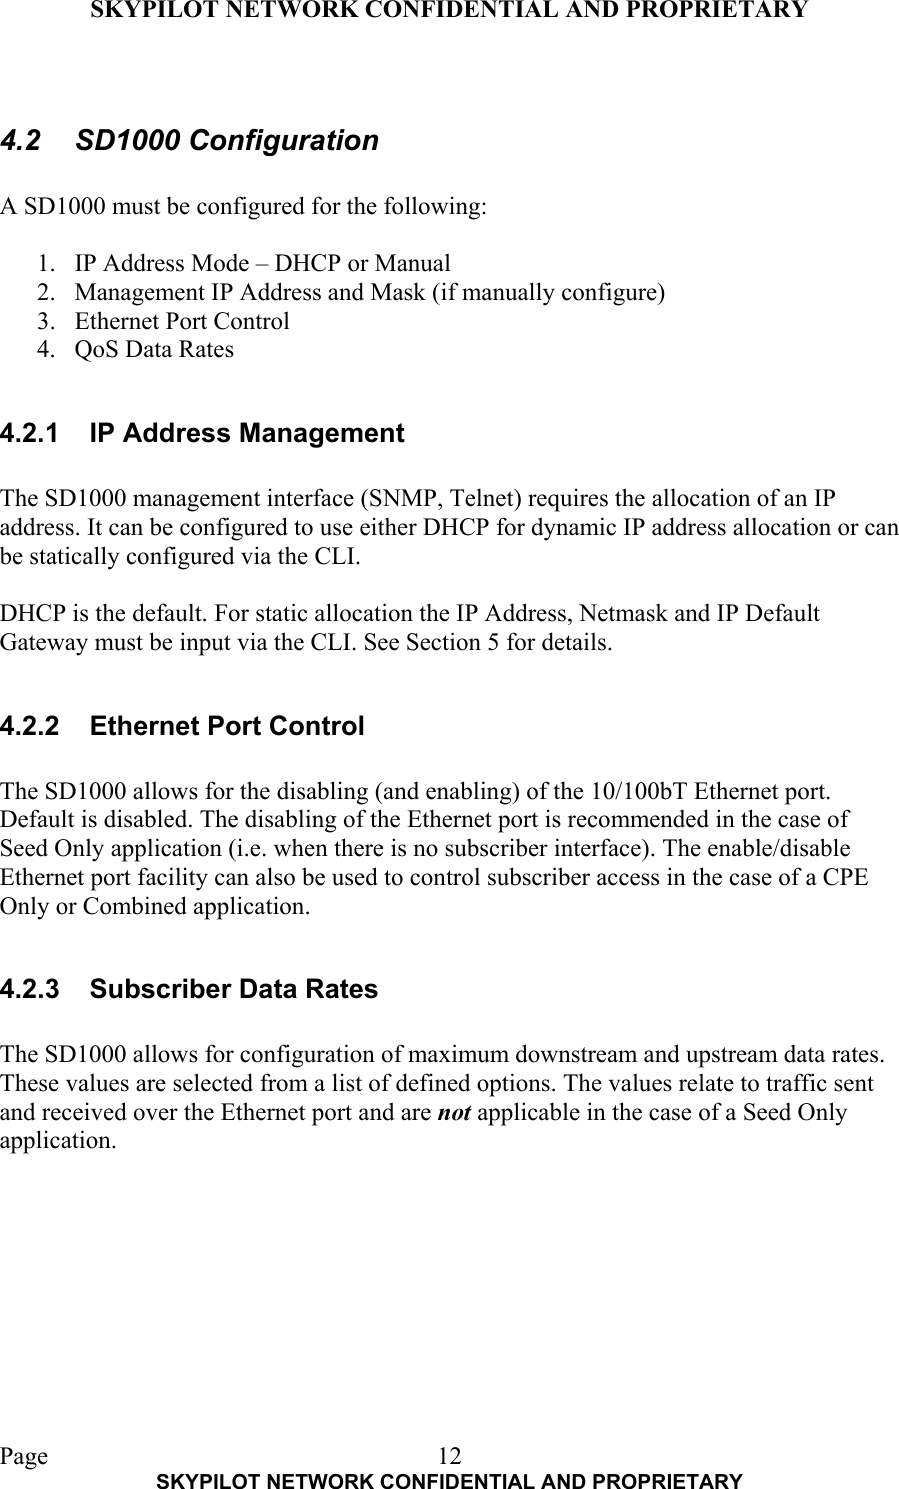 SKYPILOT NETWORK CONFIDENTIAL AND PROPRIETARY  Page    SKYPILOT NETWORK CONFIDENTIAL AND PROPRIETARY 12 4.2 SD1000 Configuration  A SD1000 must be configured for the following:  1.  IP Address Mode – DHCP or Manual 2.  Management IP Address and Mask (if manually configure) 3.  Ethernet Port Control 4.  QoS Data Rates  4.2.1  IP Address Management  The SD1000 management interface (SNMP, Telnet) requires the allocation of an IP address. It can be configured to use either DHCP for dynamic IP address allocation or can be statically configured via the CLI.   DHCP is the default. For static allocation the IP Address, Netmask and IP Default Gateway must be input via the CLI. See Section 5 for details.  4.2.2  Ethernet Port Control  The SD1000 allows for the disabling (and enabling) of the 10/100bT Ethernet port. Default is disabled. The disabling of the Ethernet port is recommended in the case of Seed Only application (i.e. when there is no subscriber interface). The enable/disable Ethernet port facility can also be used to control subscriber access in the case of a CPE Only or Combined application.  4.2.3  Subscriber Data Rates  The SD1000 allows for configuration of maximum downstream and upstream data rates. These values are selected from a list of defined options. The values relate to traffic sent and received over the Ethernet port and are not applicable in the case of a Seed Only application.  